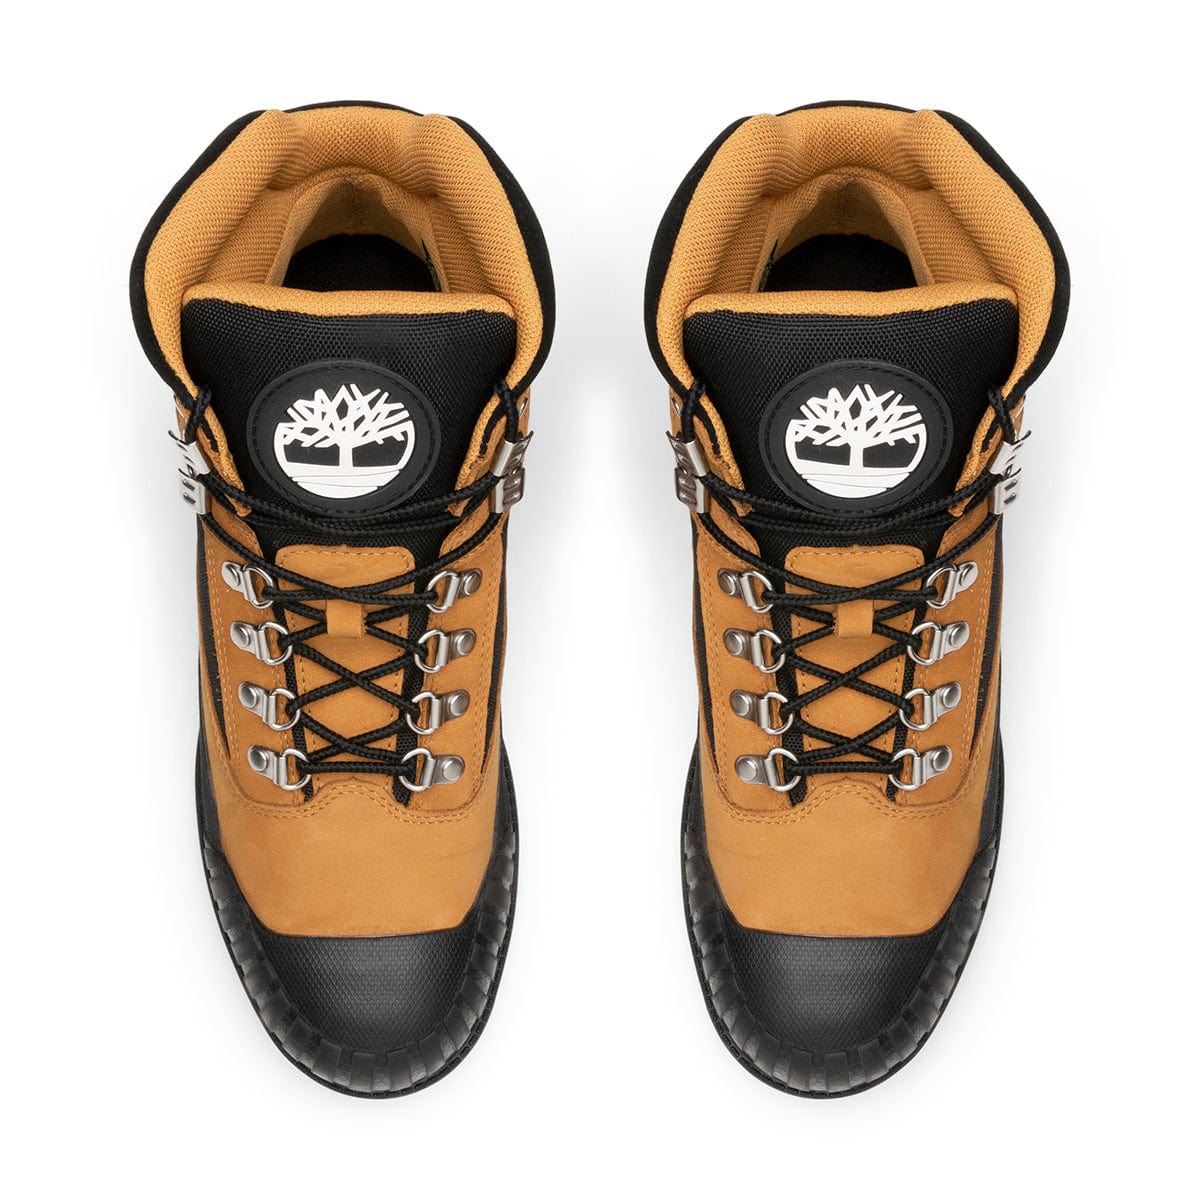 Timberland Boots HERITAGE BOOT